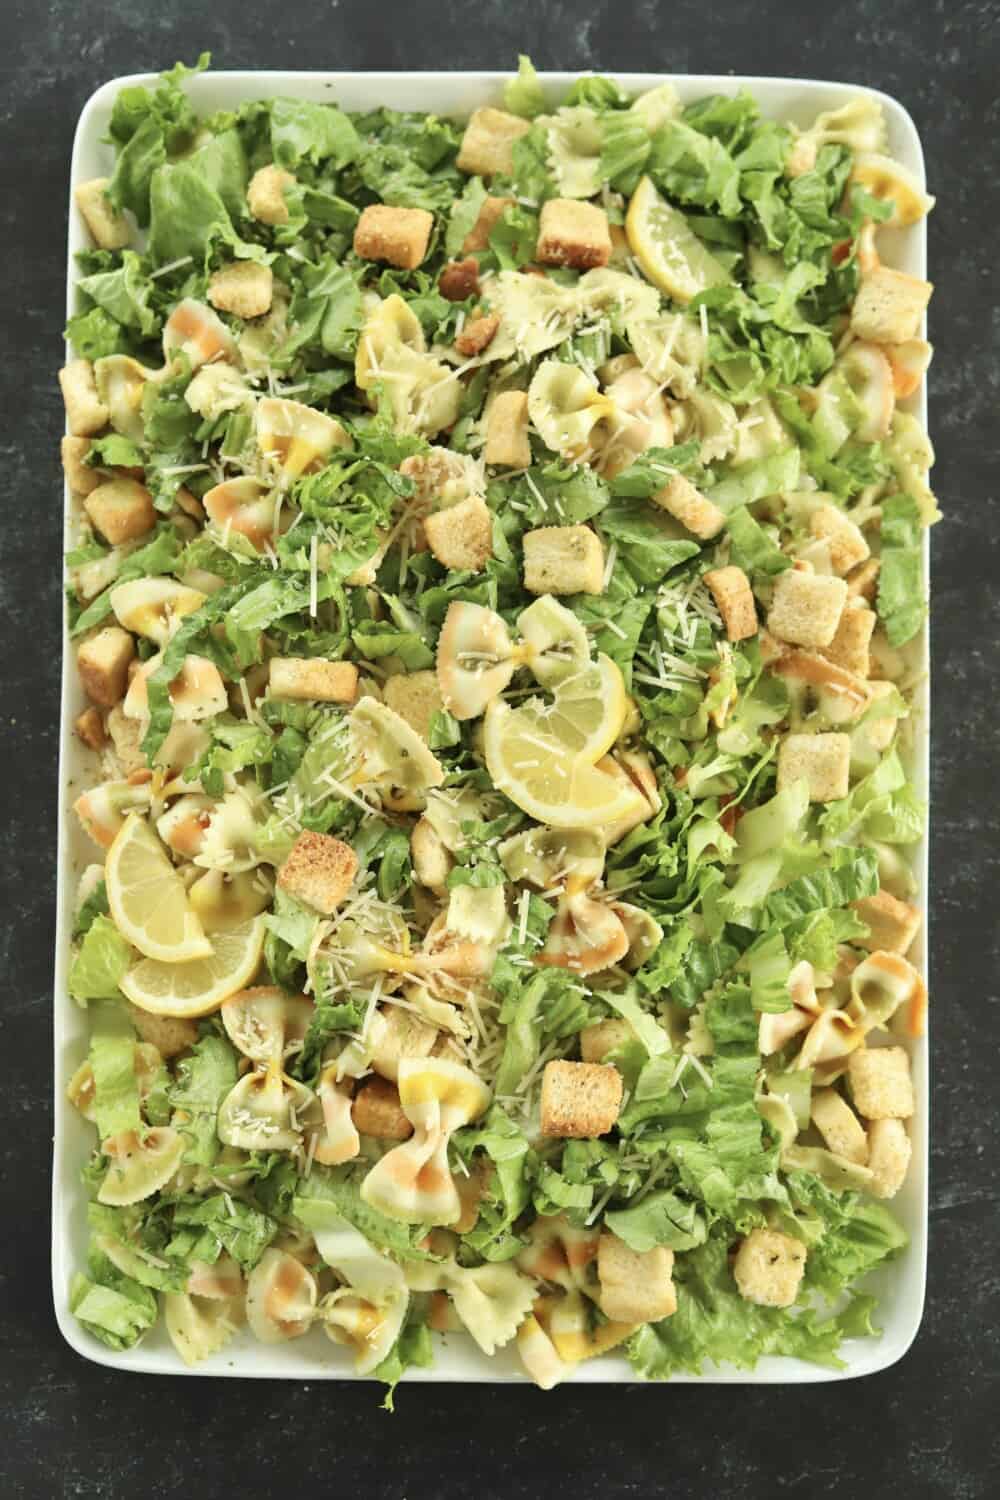 a rectangular white serving platter full with pesto pasta salad made with lettuce, noodles, Parmesan, croutons, and a pesto sauce topped with lemon wedges